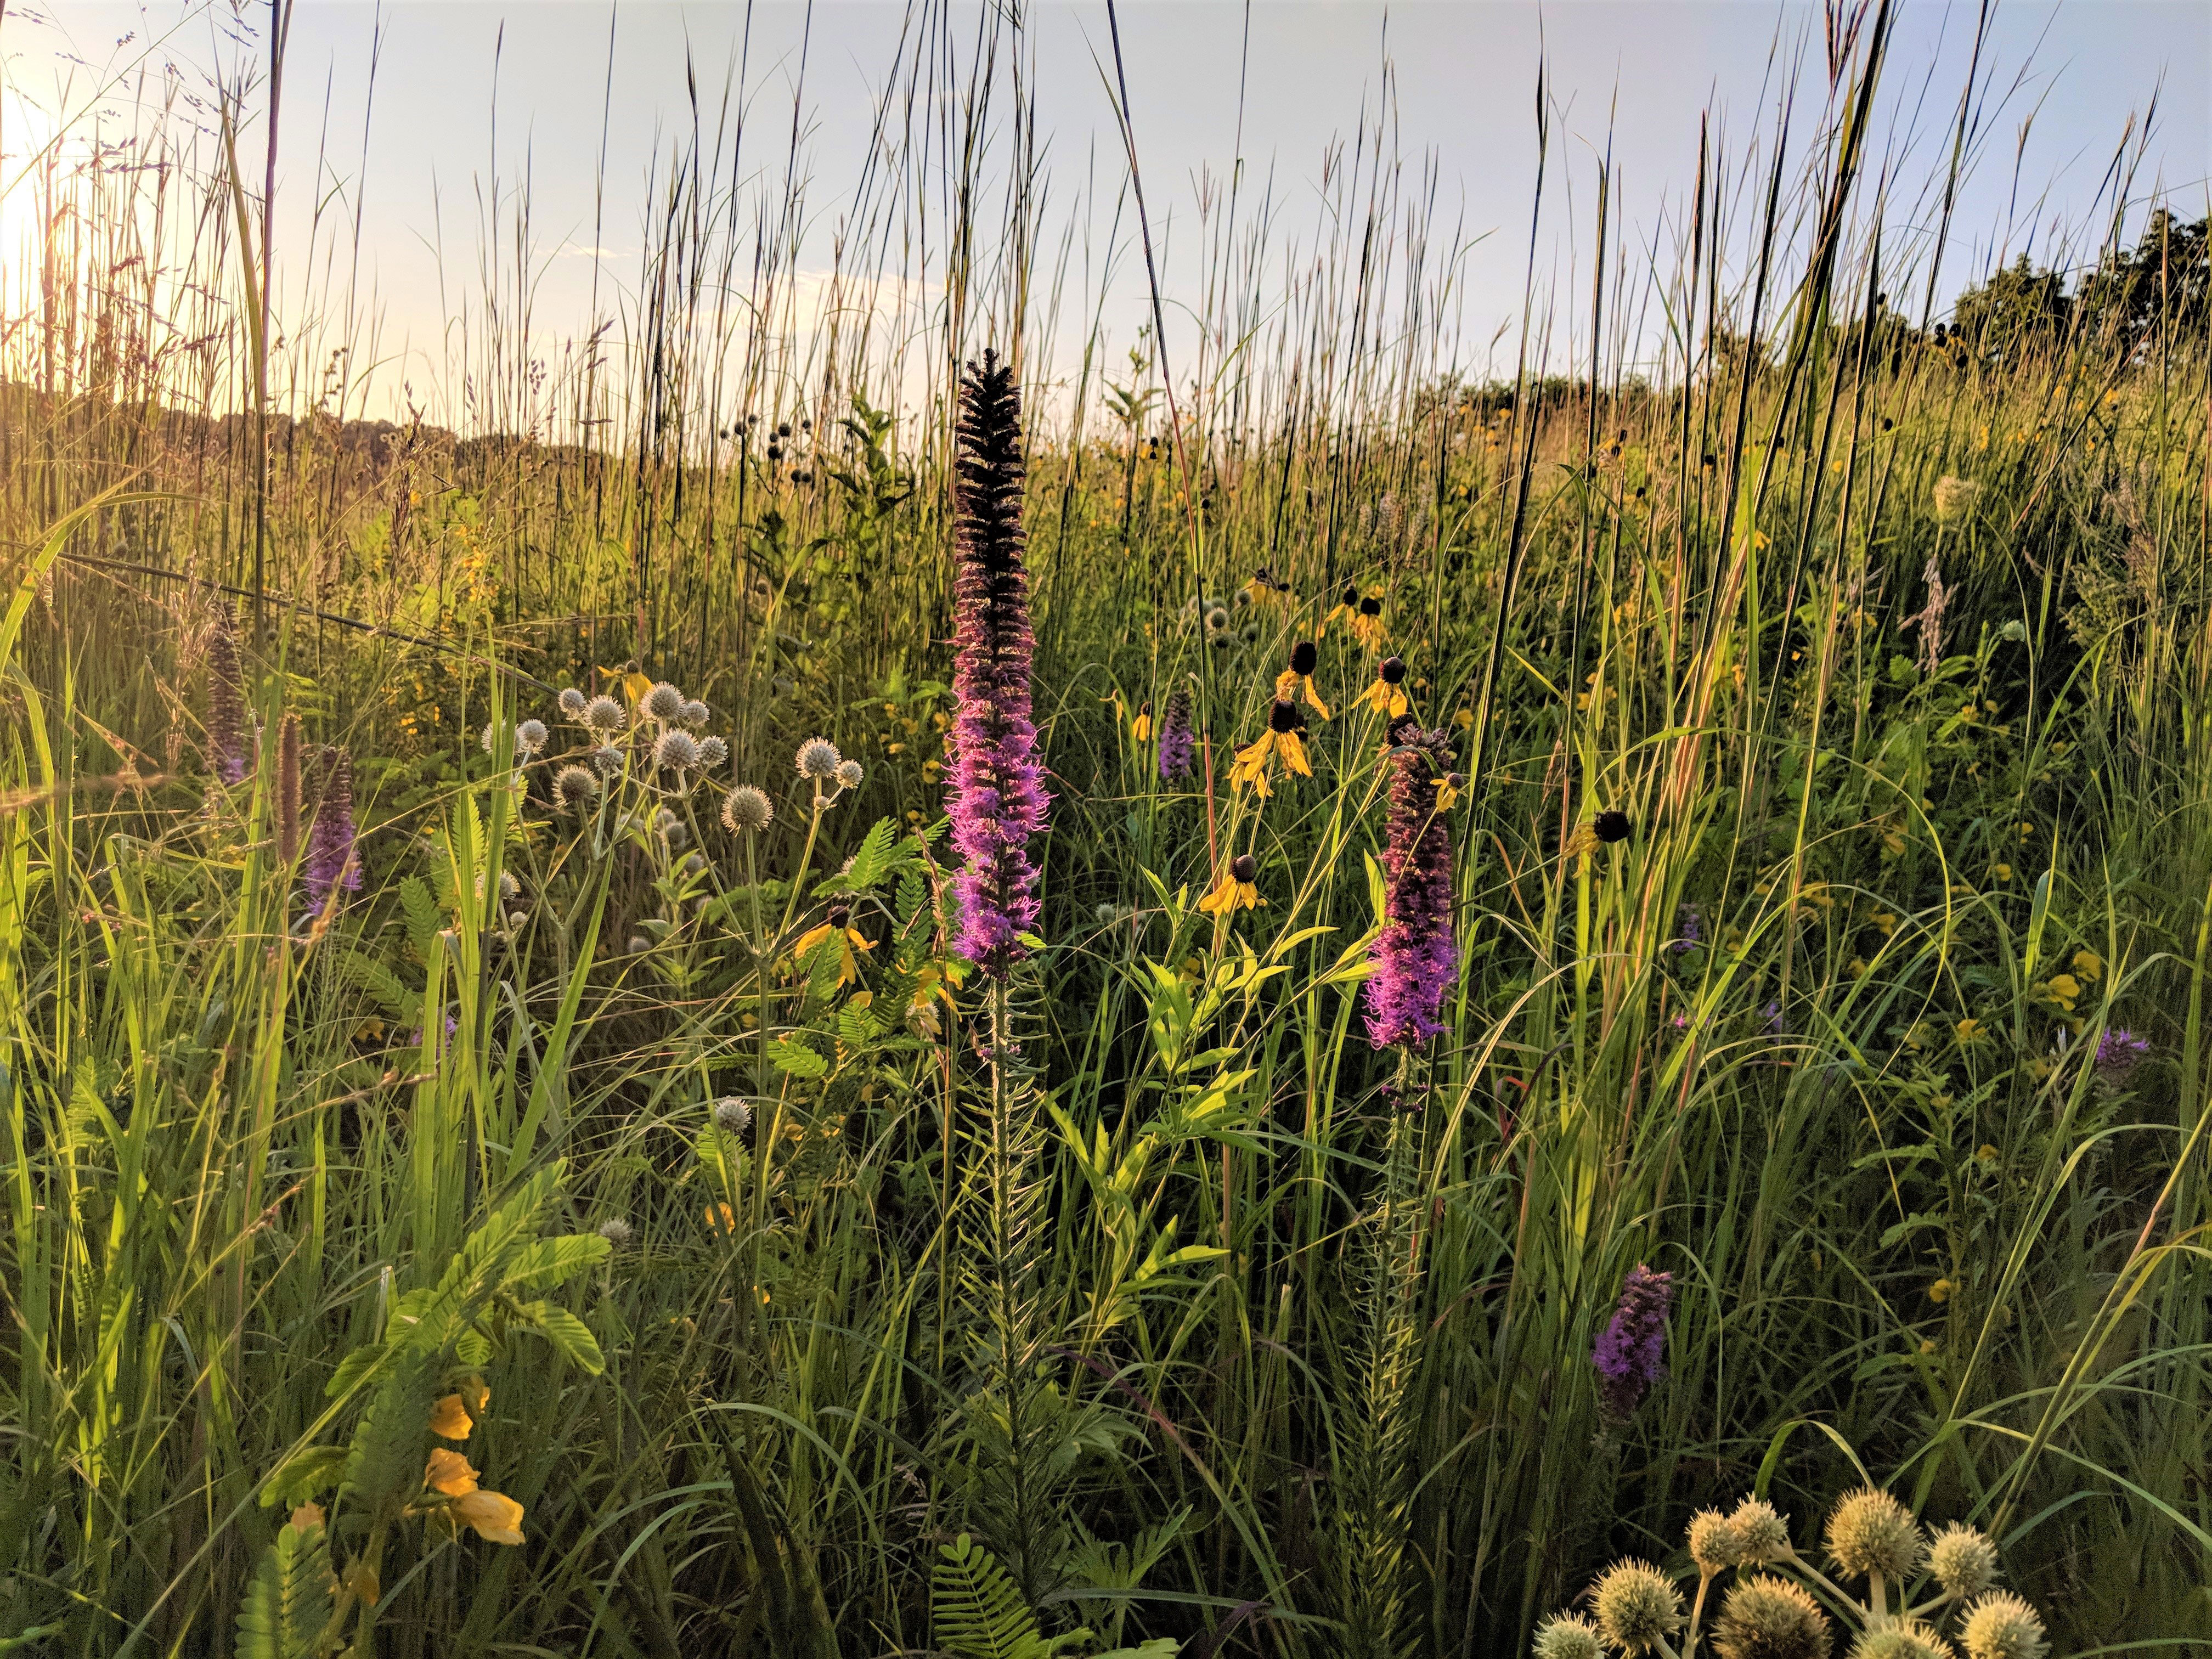 A beautifully backlit scene, in which the stems and blooms of the plants appear to glow in golden evening light, showcases a diversity of flowering plant species in a prairie landscape.